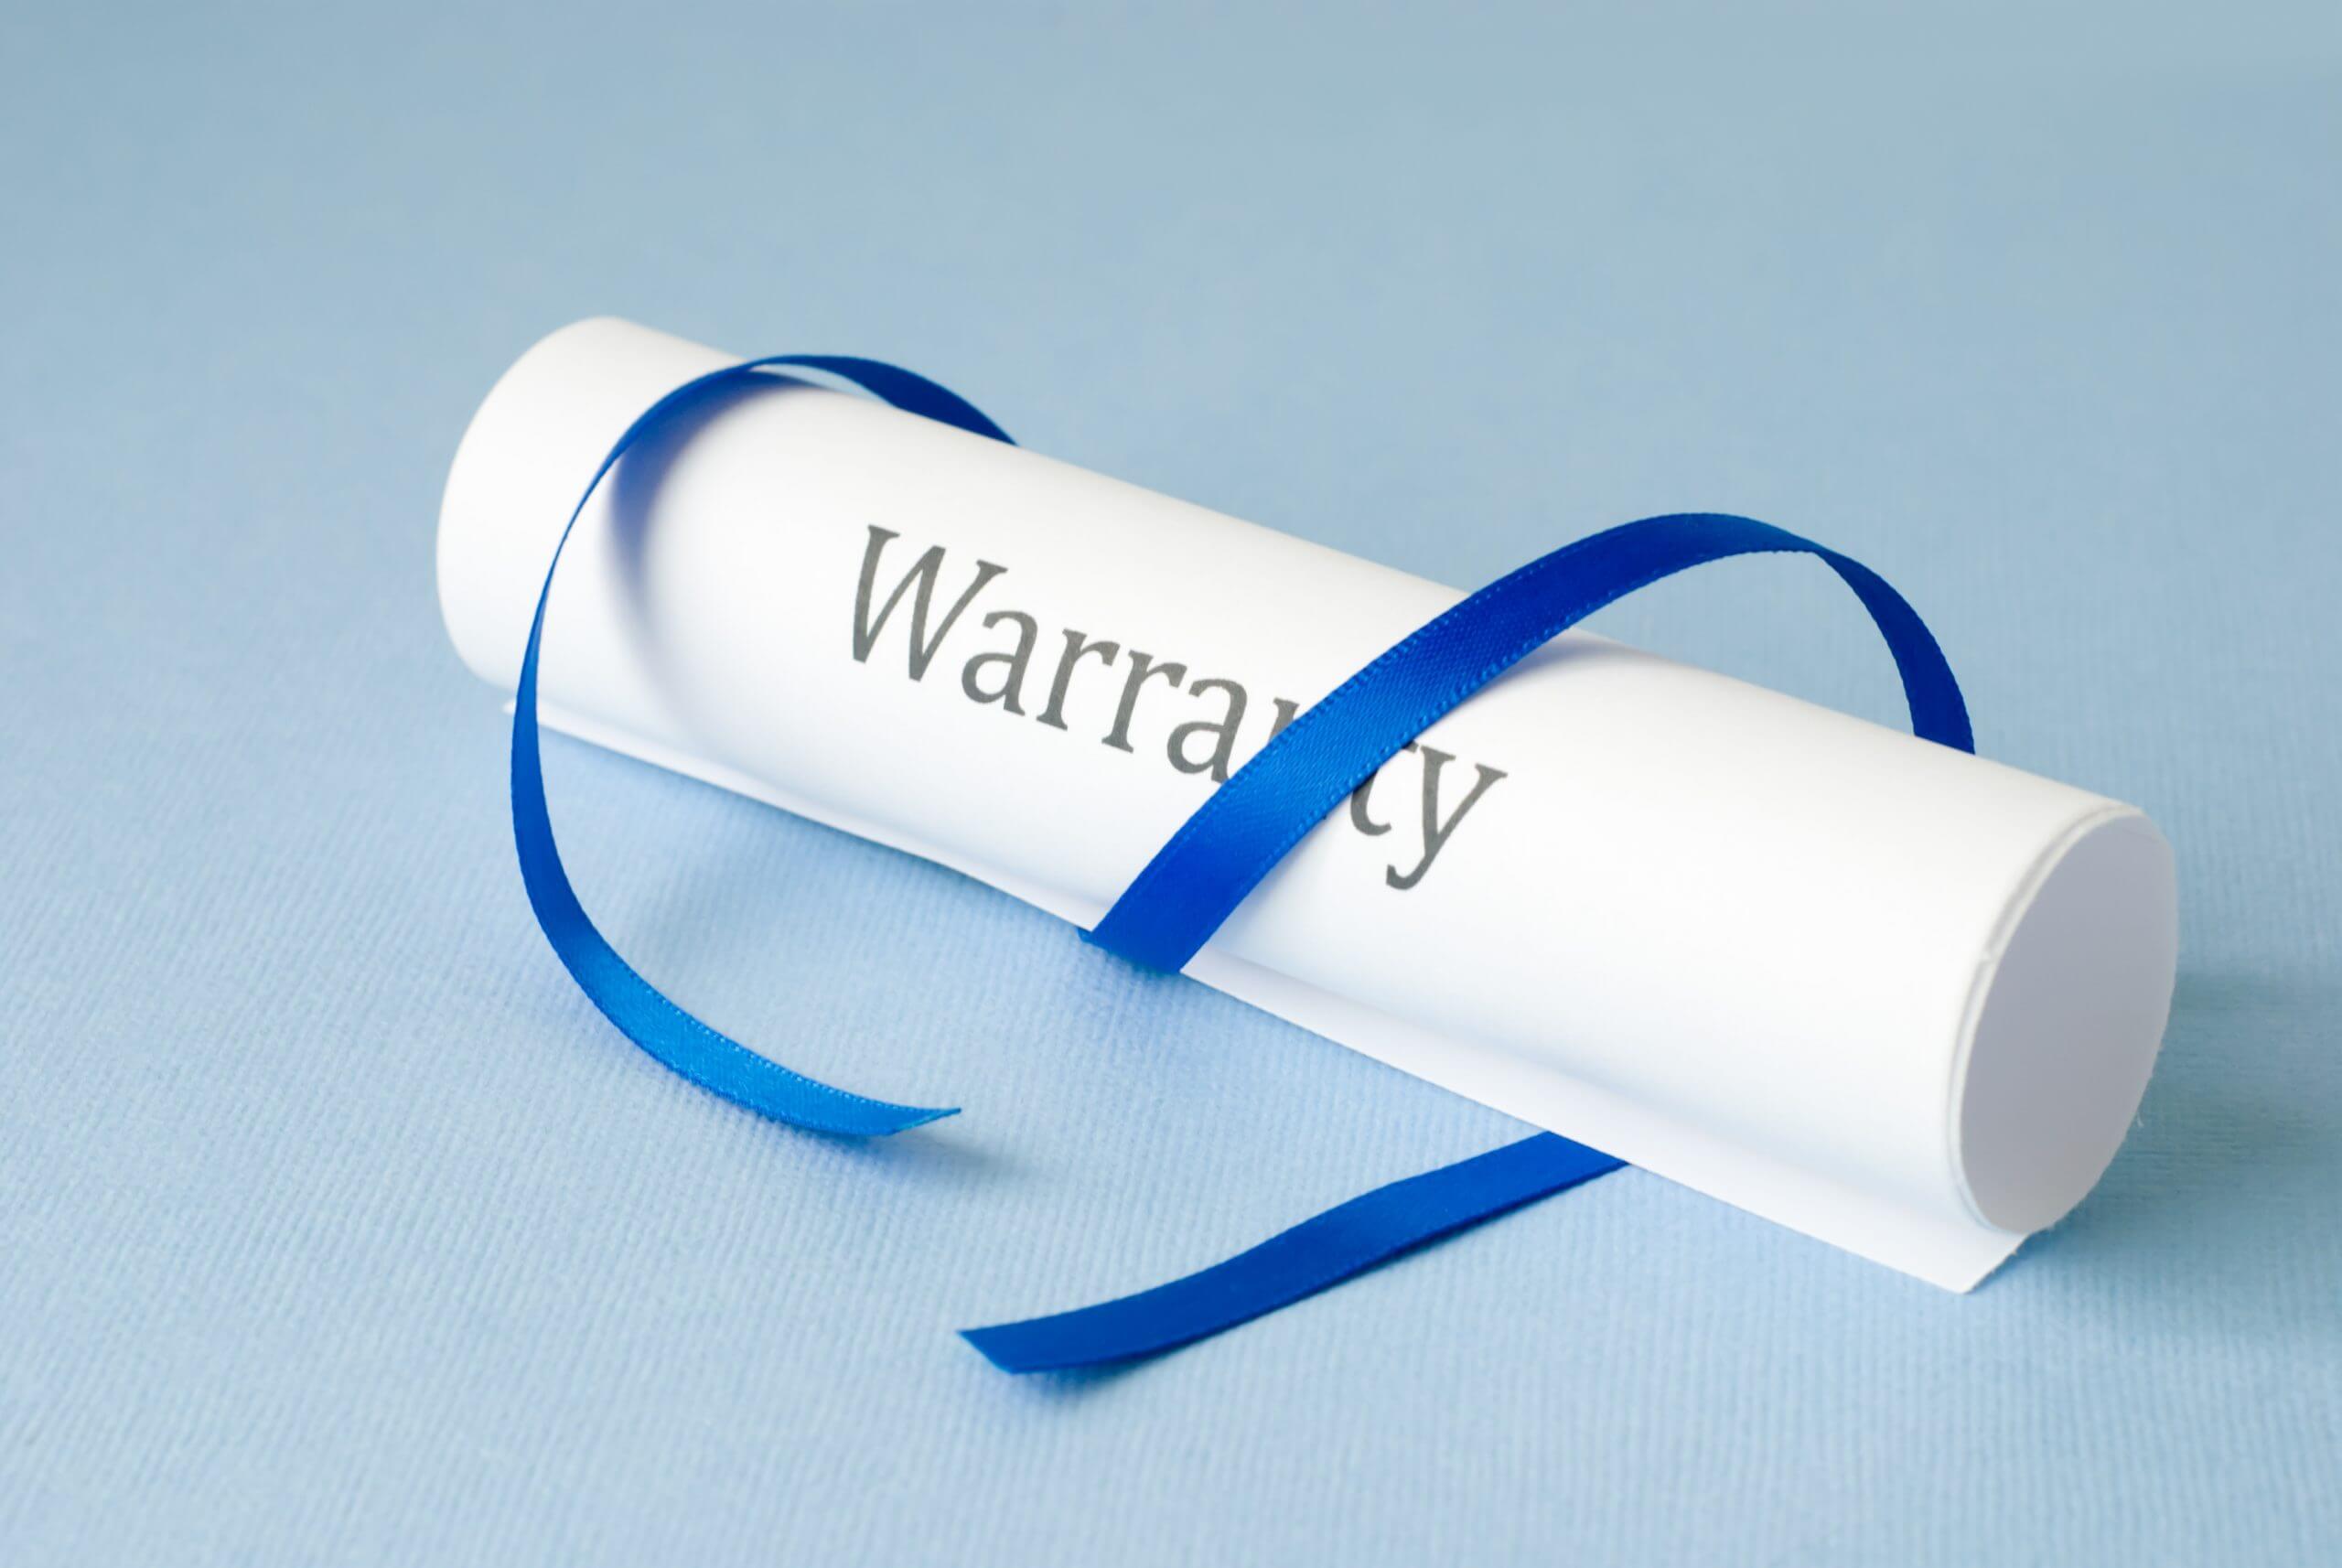 Words " Warranty" printed on a rolled white paper